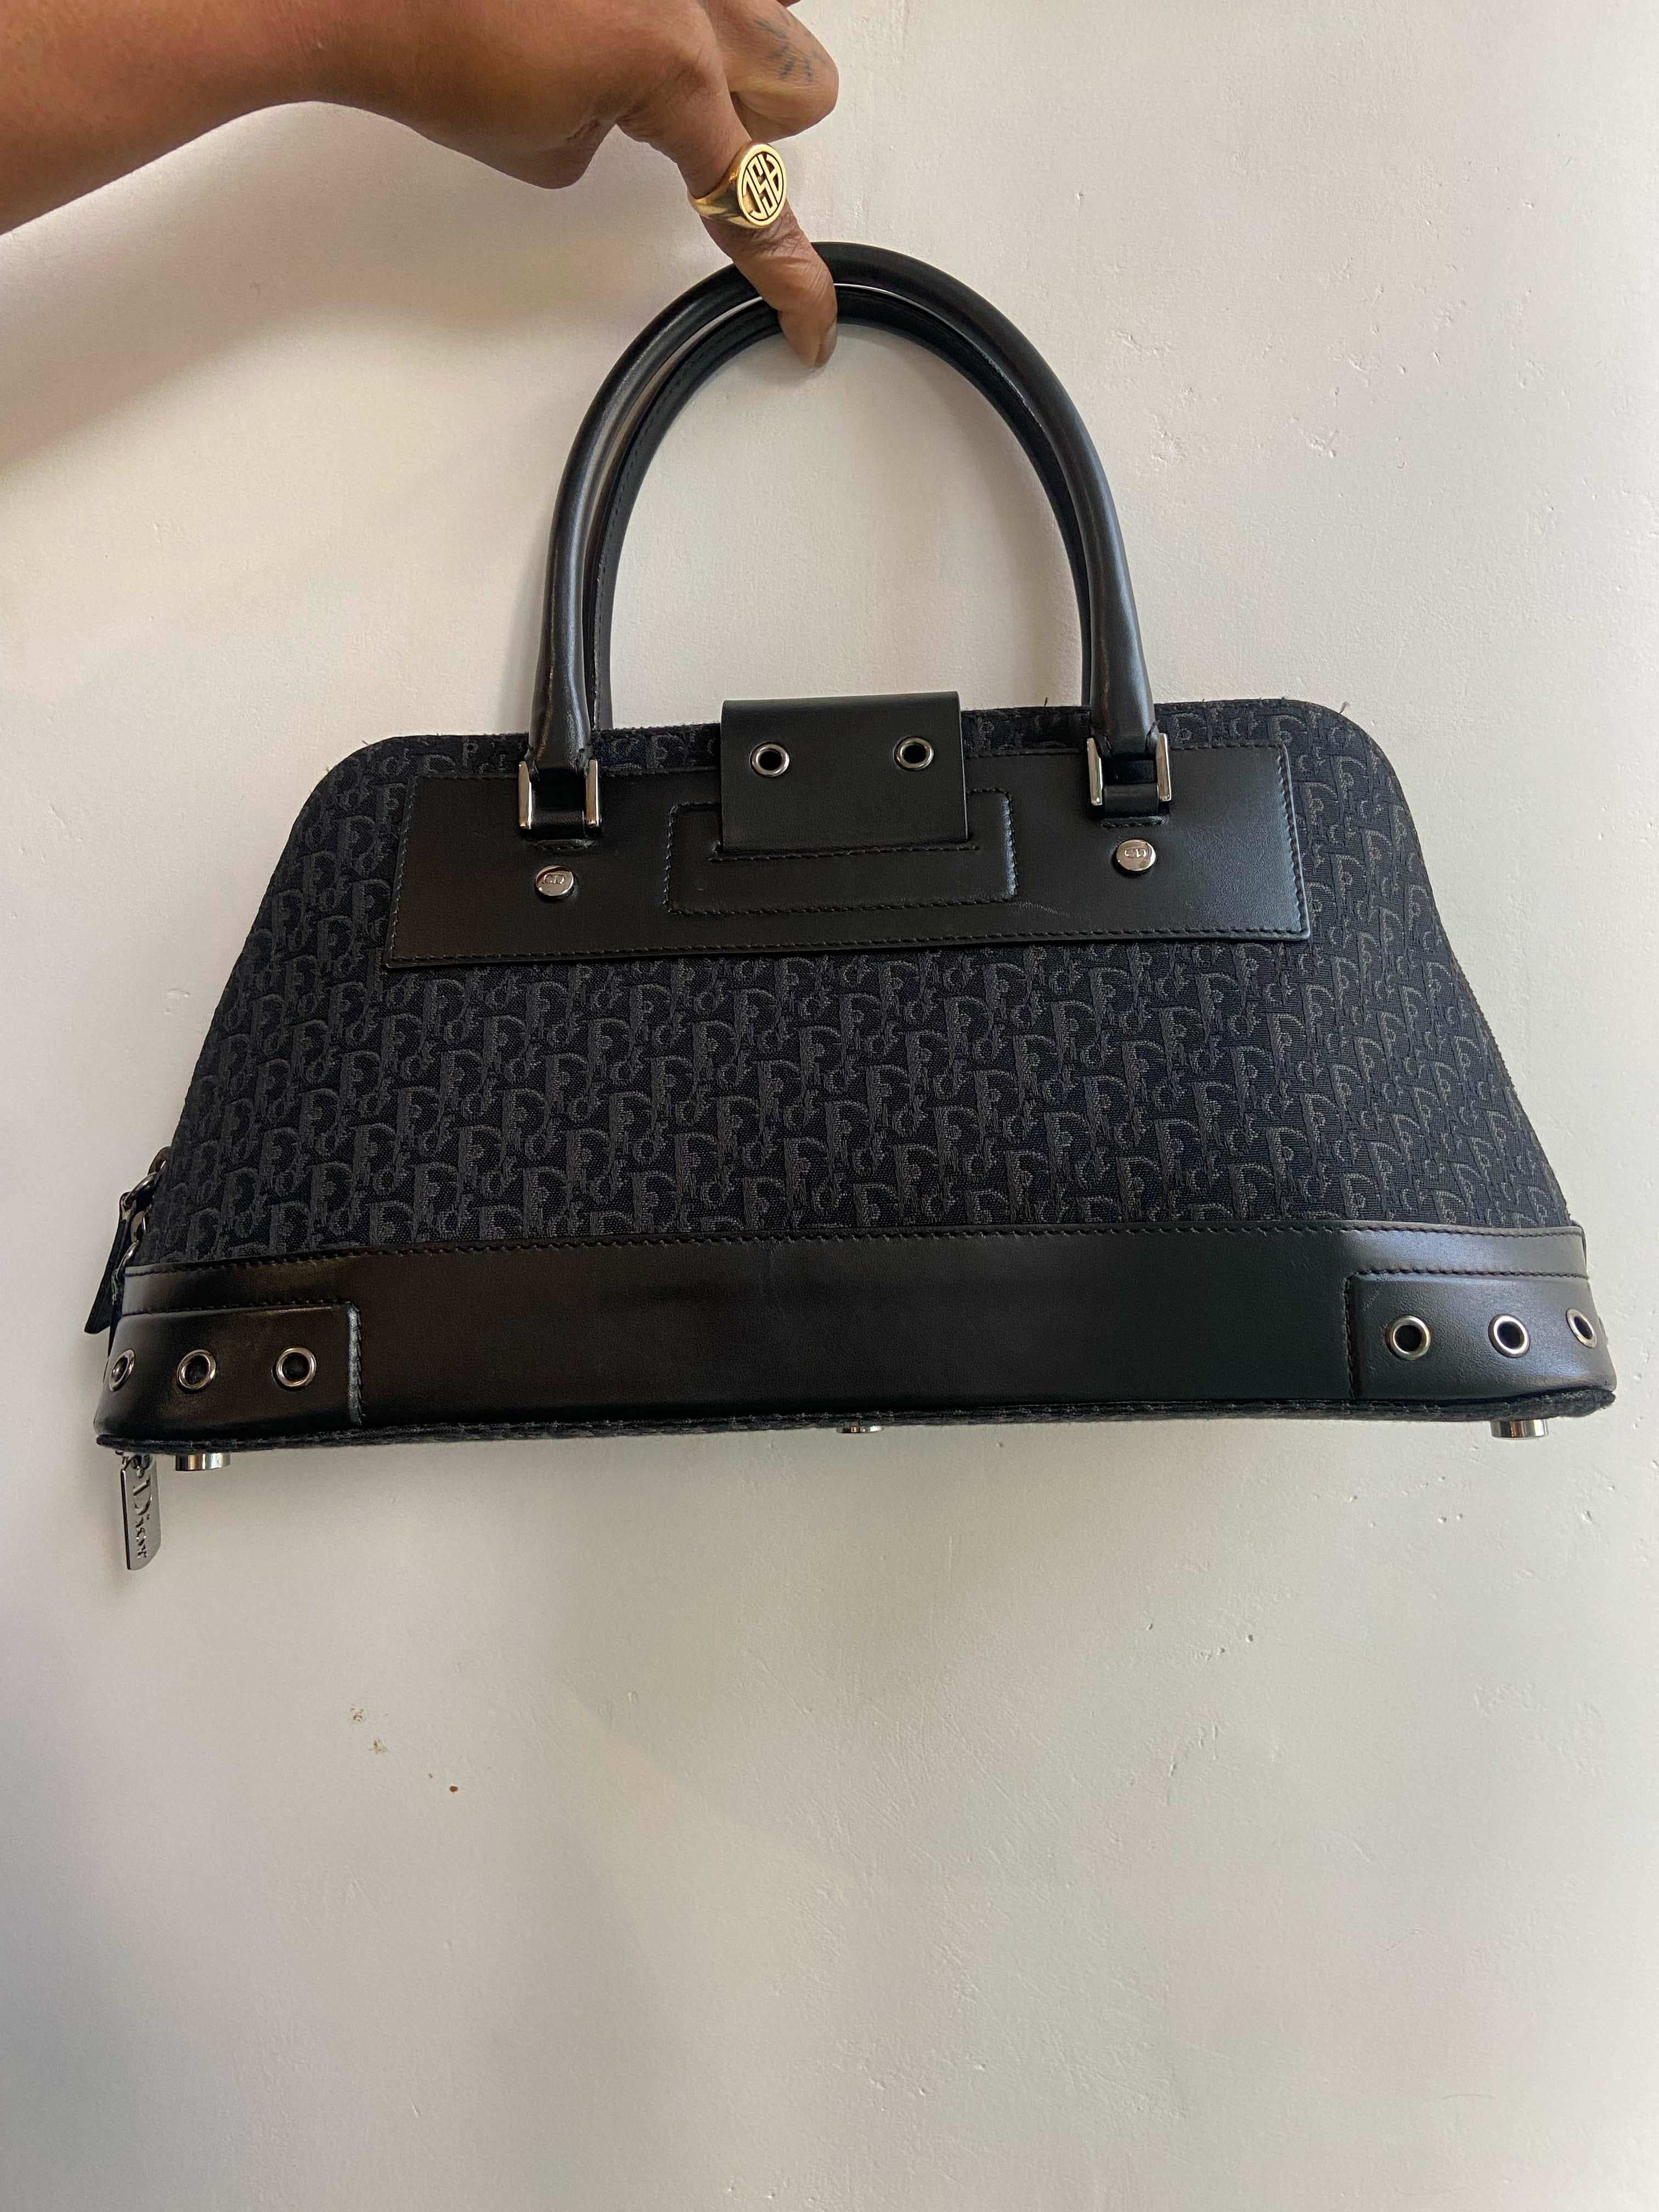 Christian Dior by John Galliano 2002 top handle black monogram trotter bag. Feature Dior hardware, structured shape, canvas body, canvas body, cowhide leather features, inside zip back pocket, rolled leather top handles. In great vintage condition.